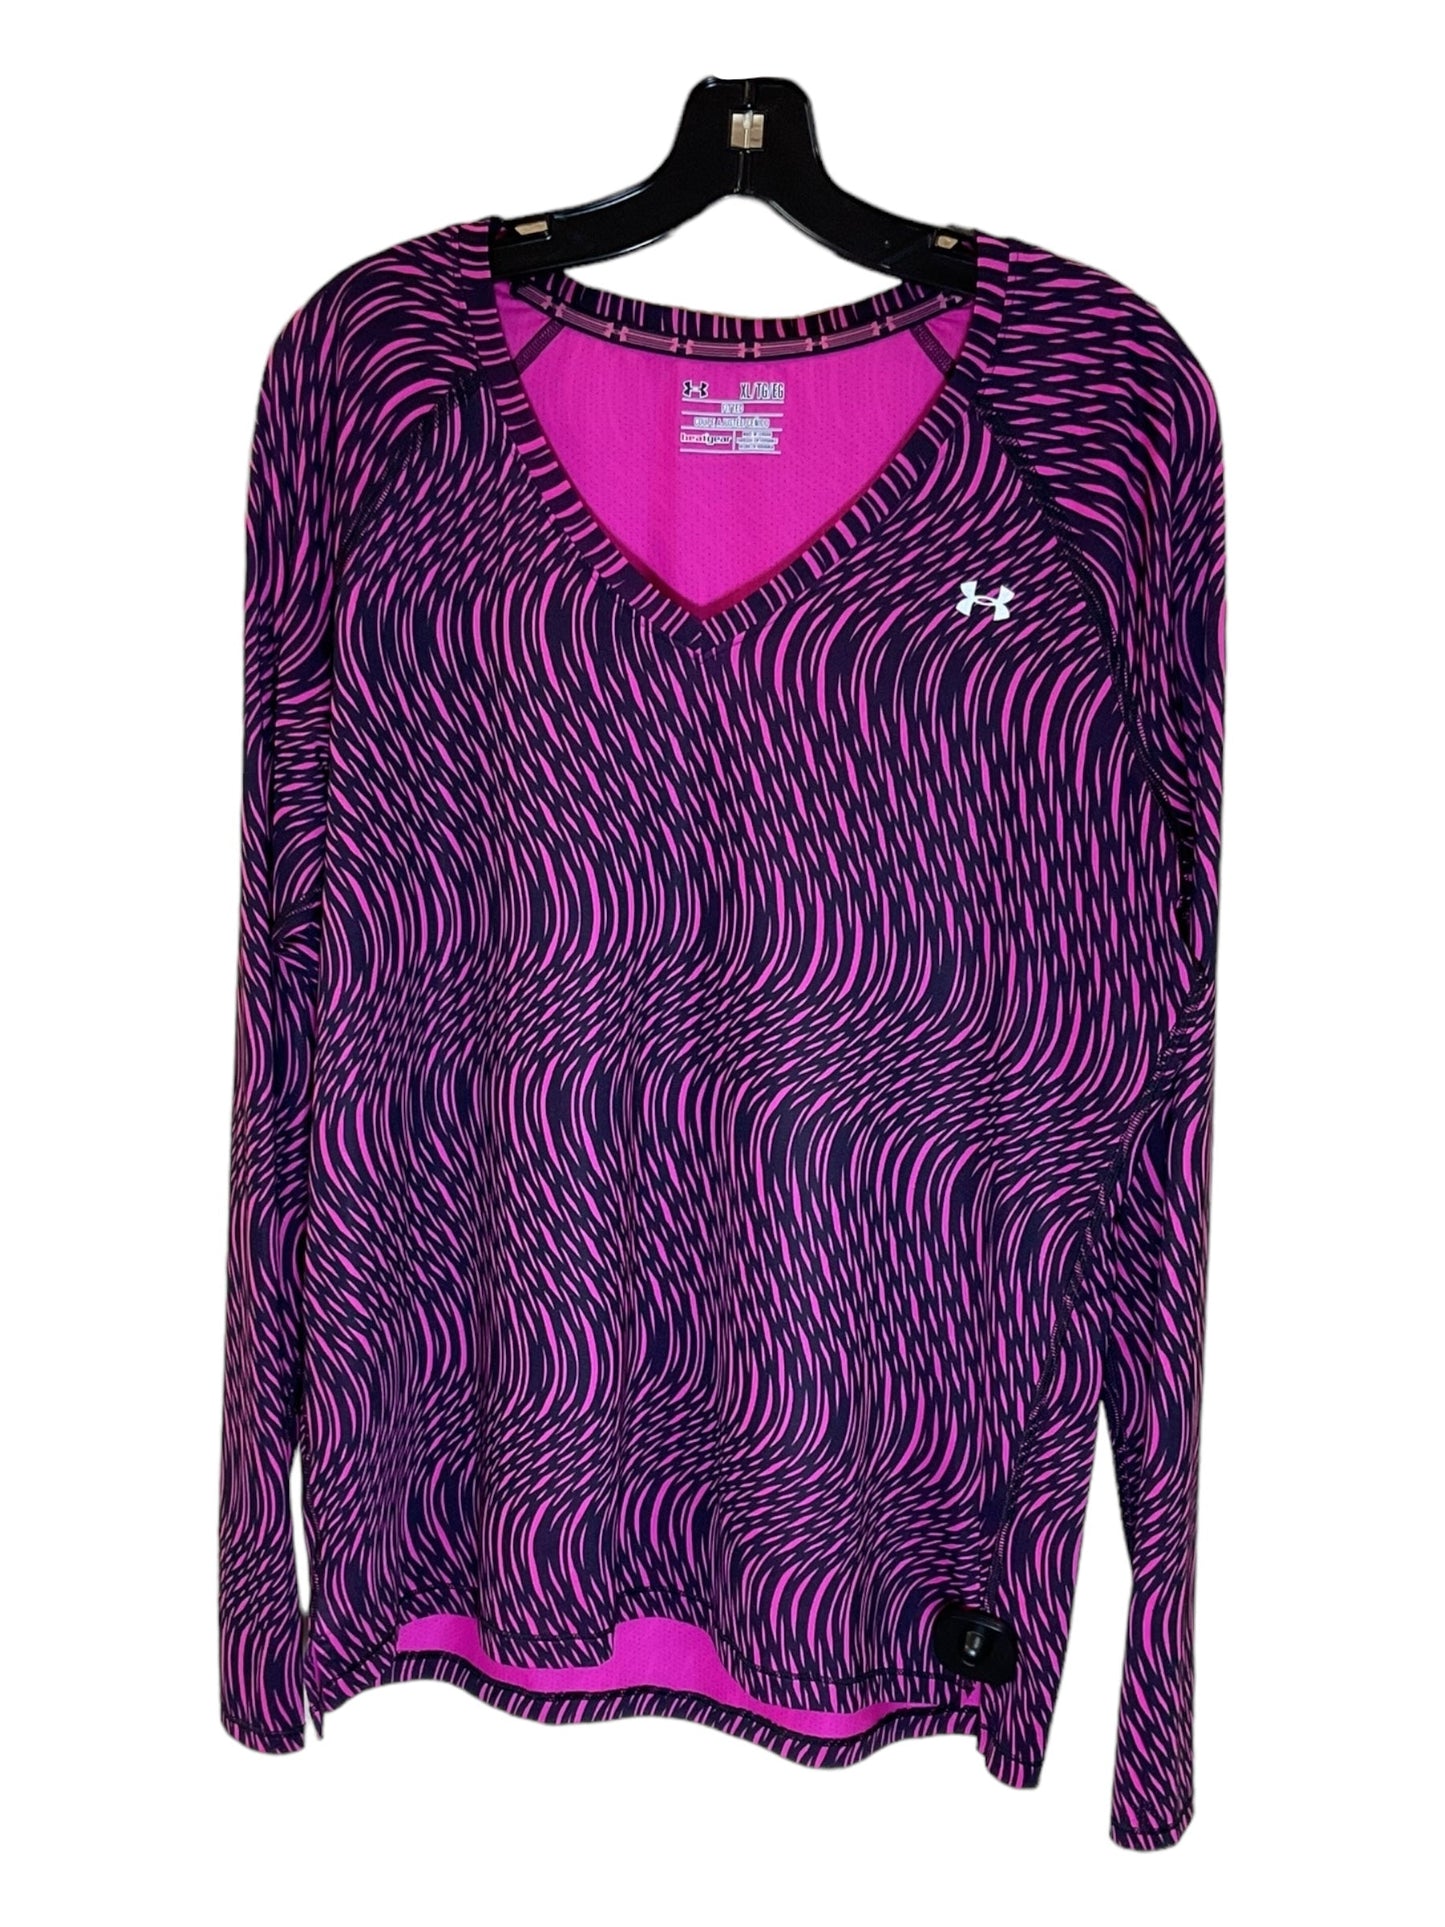 Black & Pink Athletic Top Long Sleeve Collar Under Armour, Size Xl